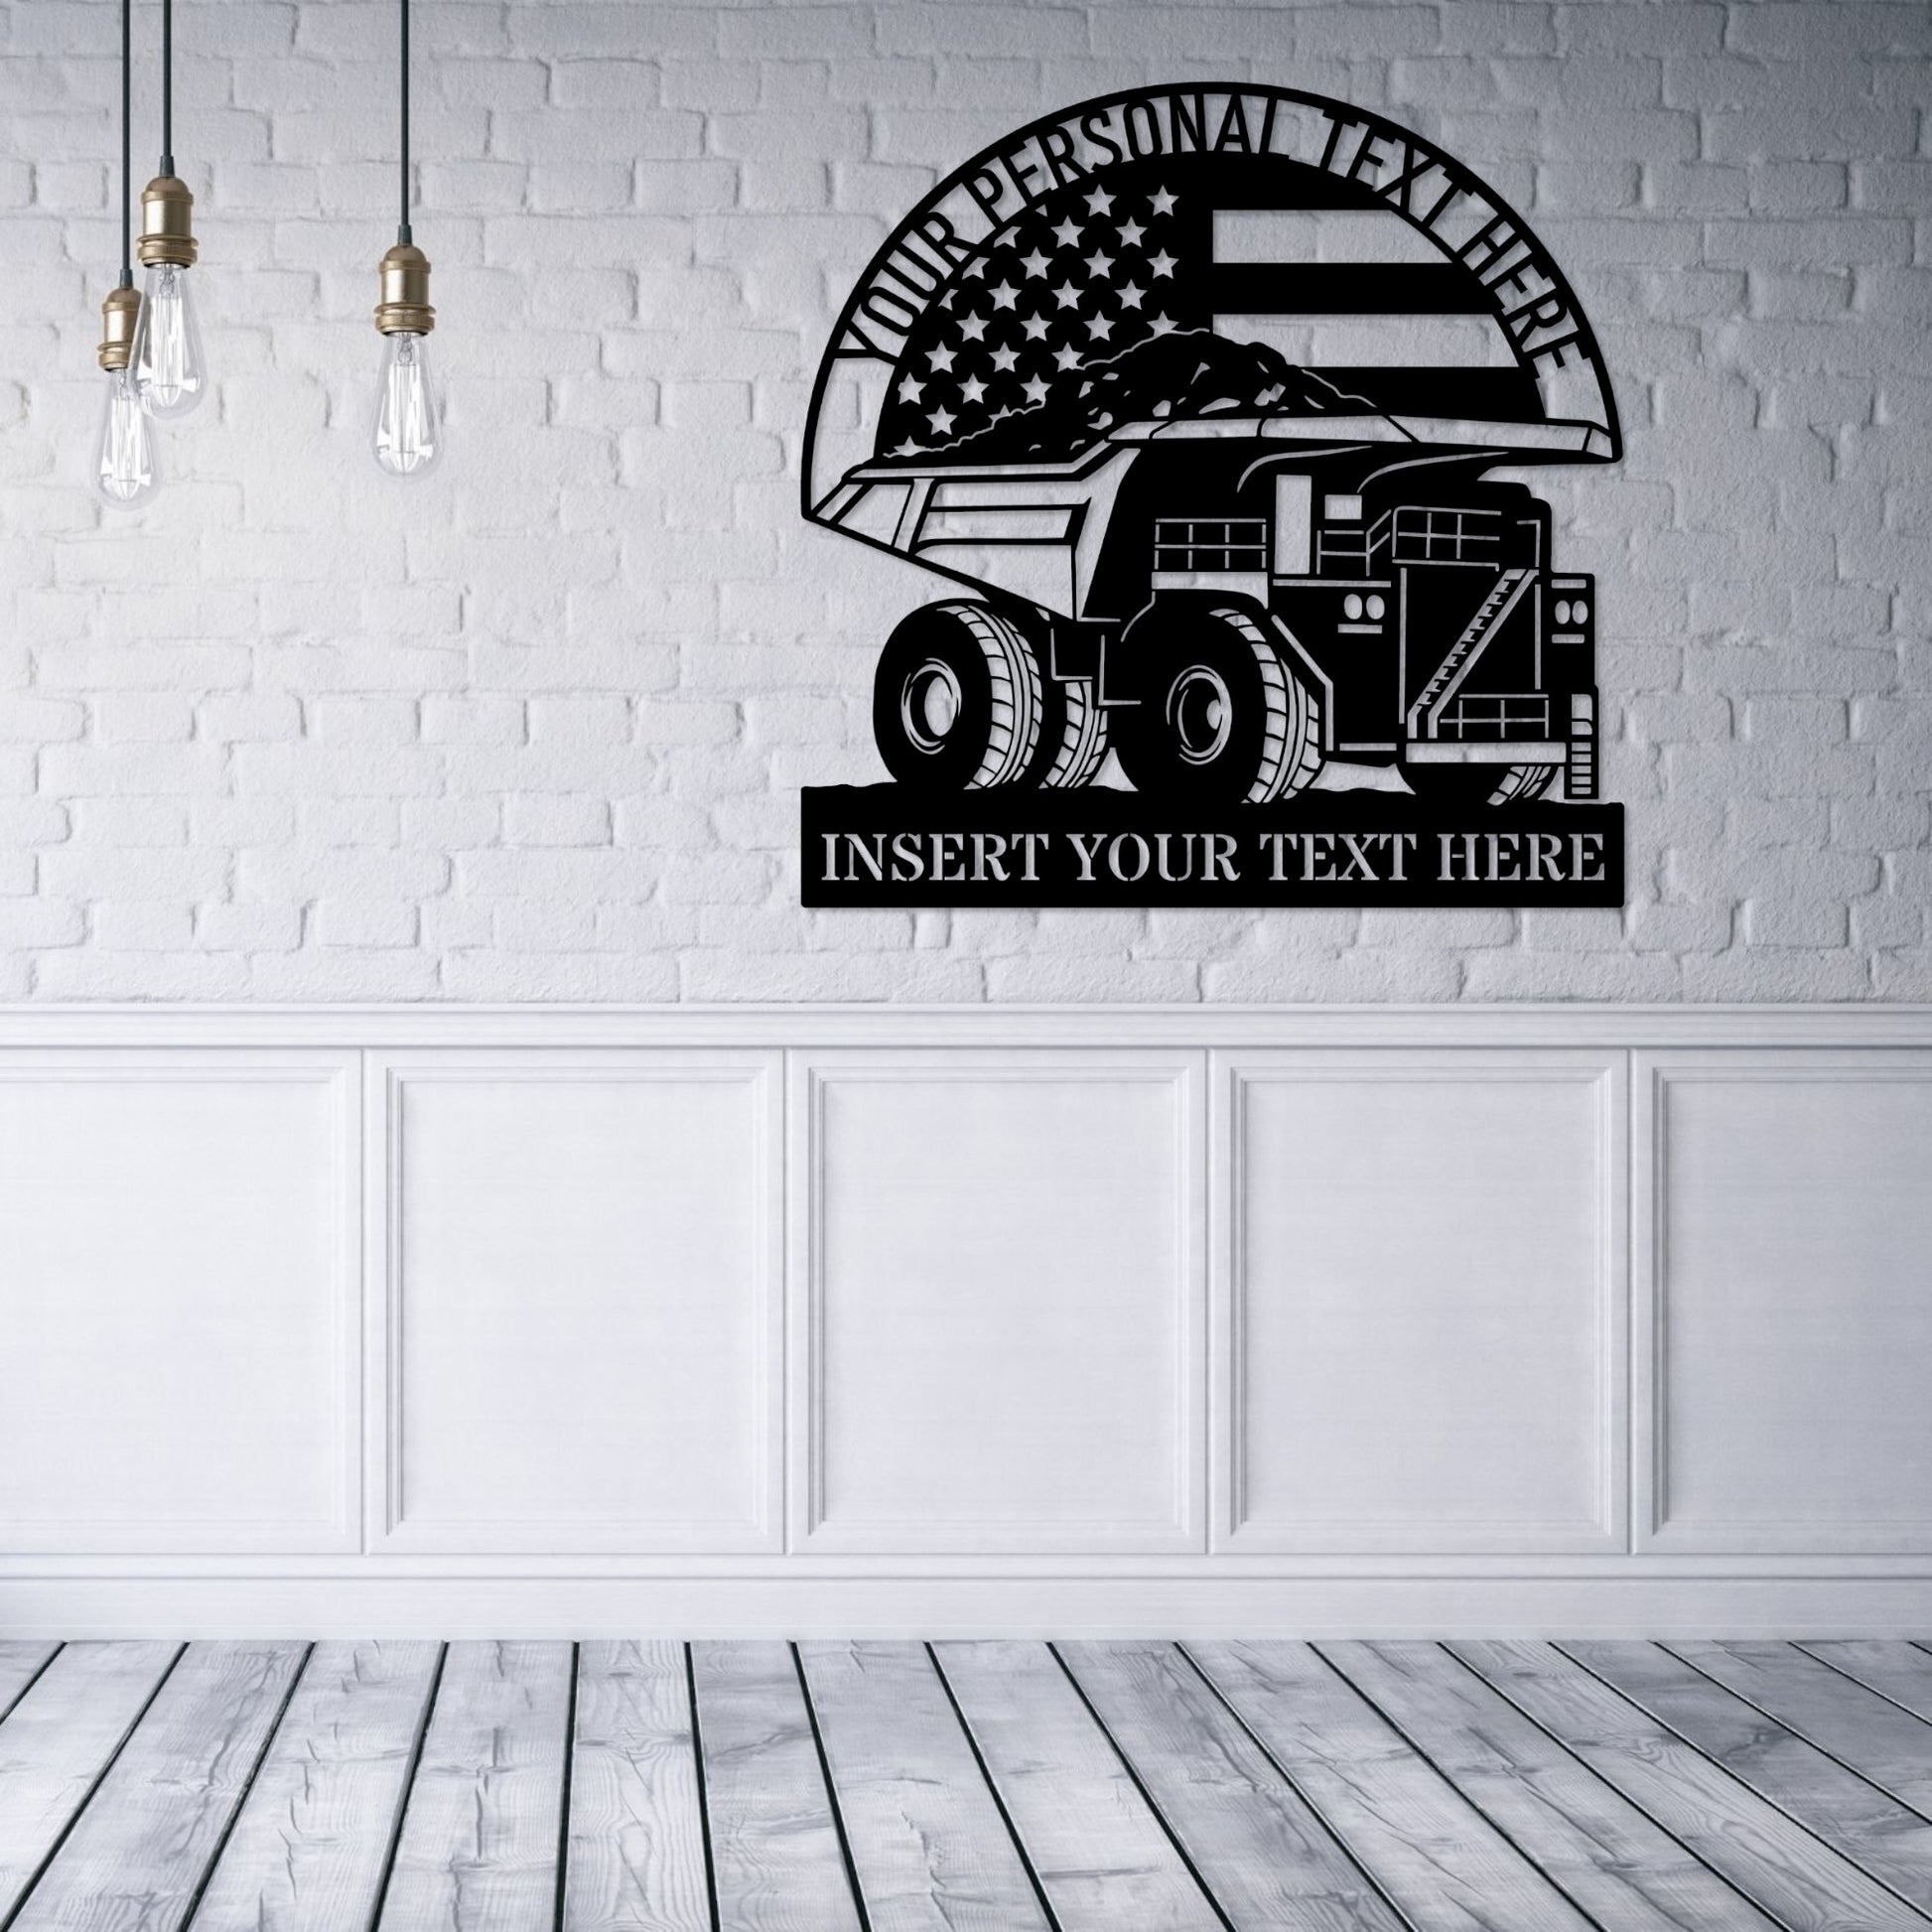 Personalized US Haul Truck Name Metal Sign. Custom American Dump Truck Wall Decor Gift. Heavy Machinery. Tipper Lorry Wall Hanging Present